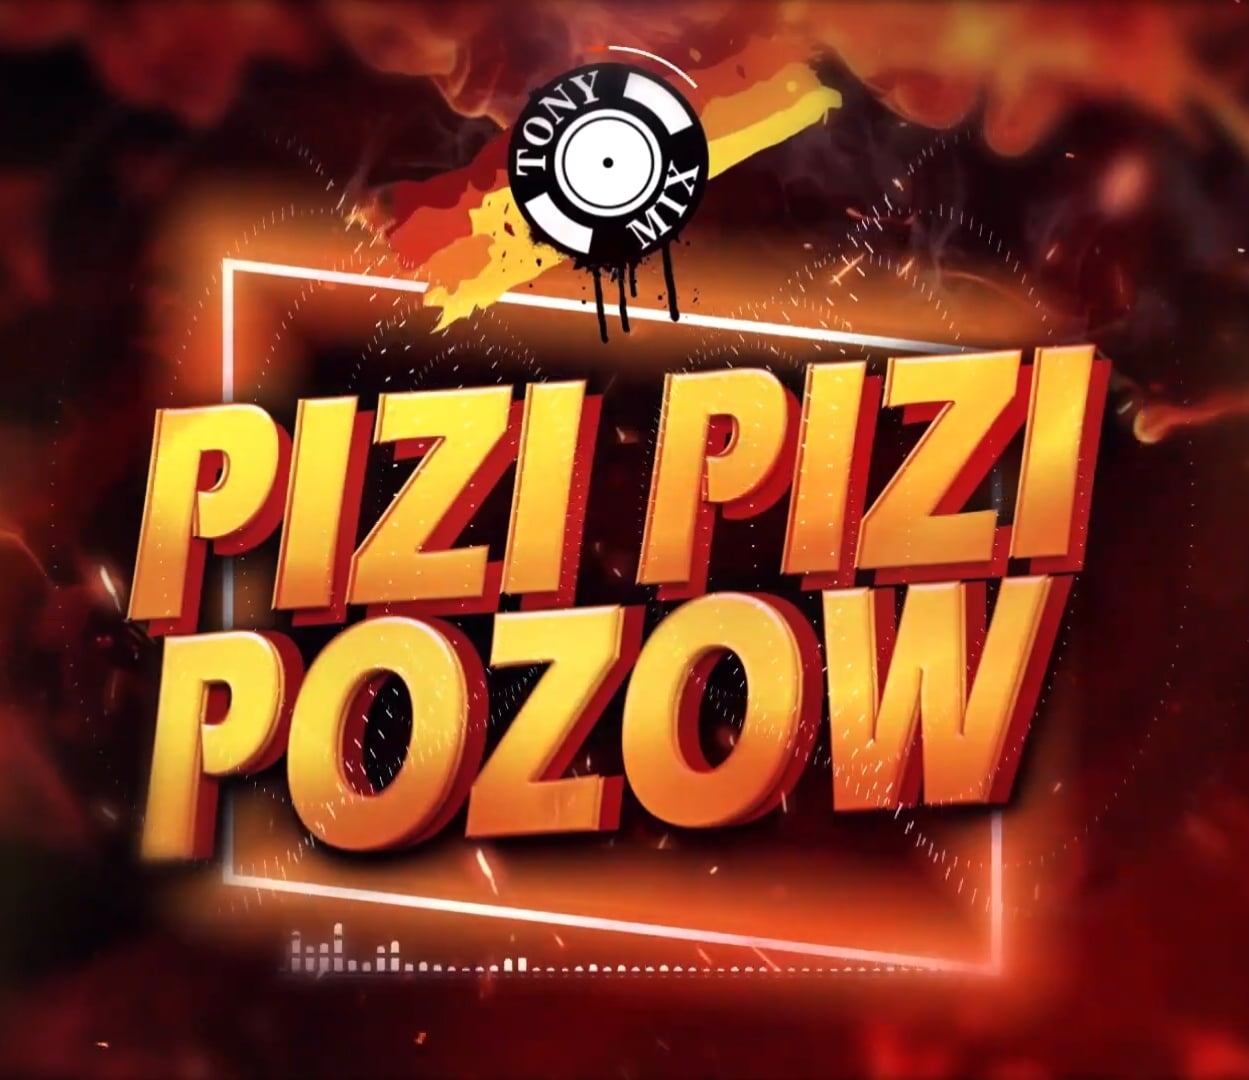 TonyMix Pizi Pizi Pozow › Tonymix pizi pizi pozow DOWNLOAD MP3